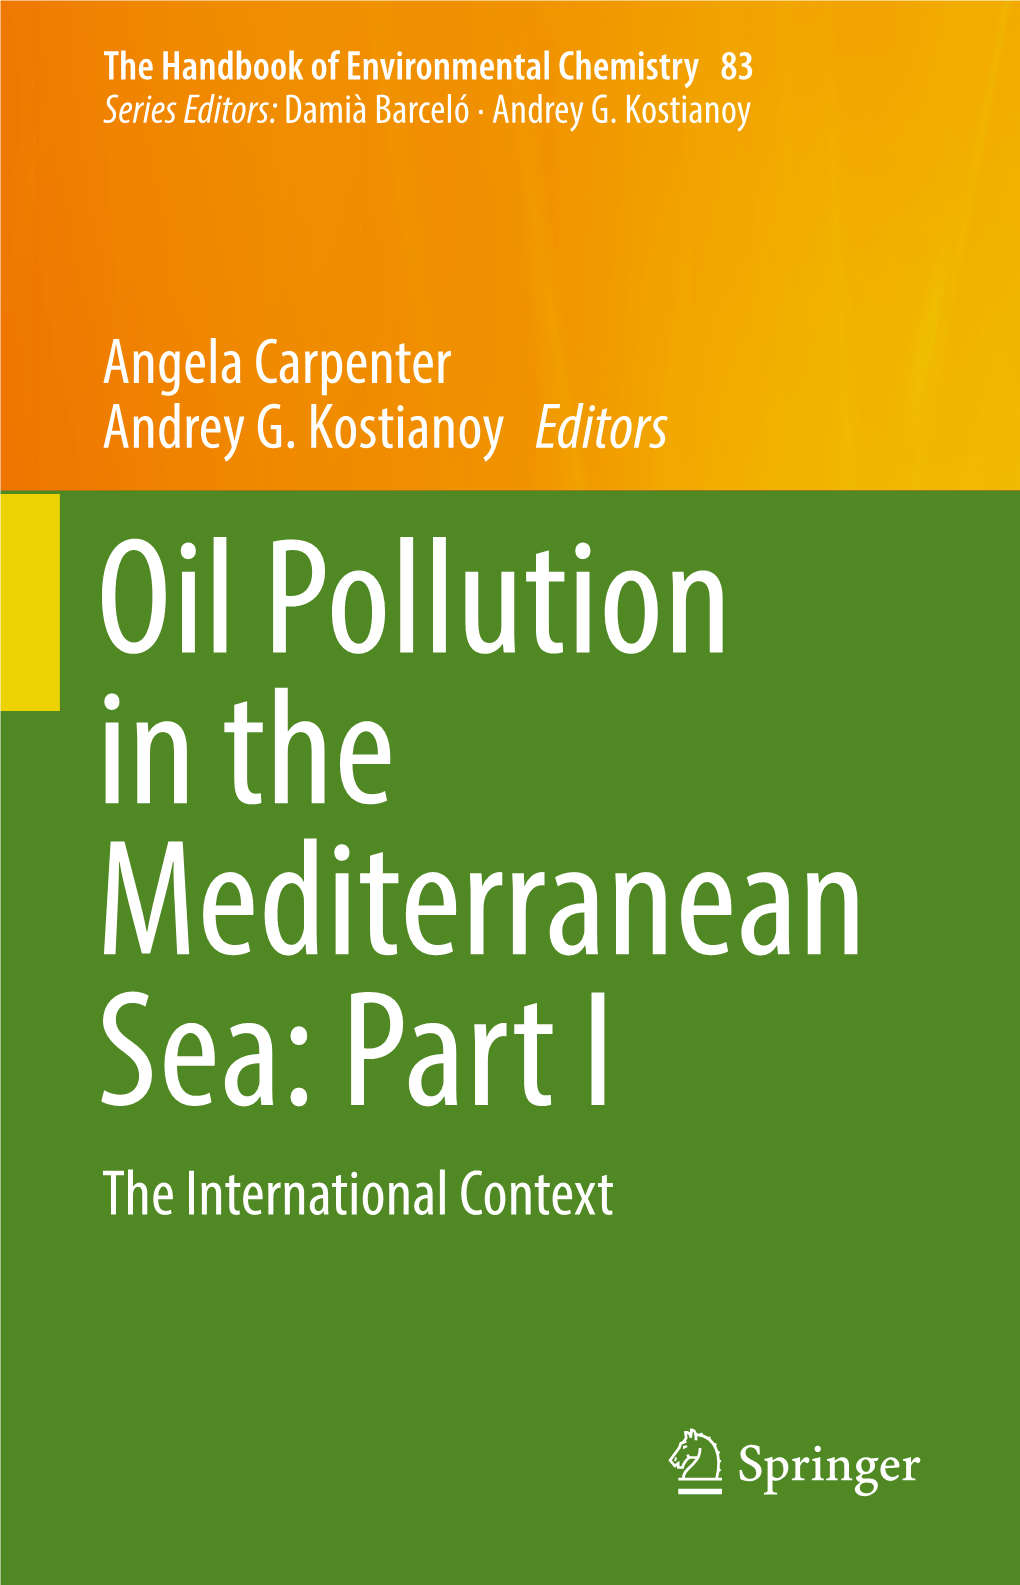 Oil Pollution in the Mediterranean Sea: Part I the International Context the Handbook of Environmental Chemistry